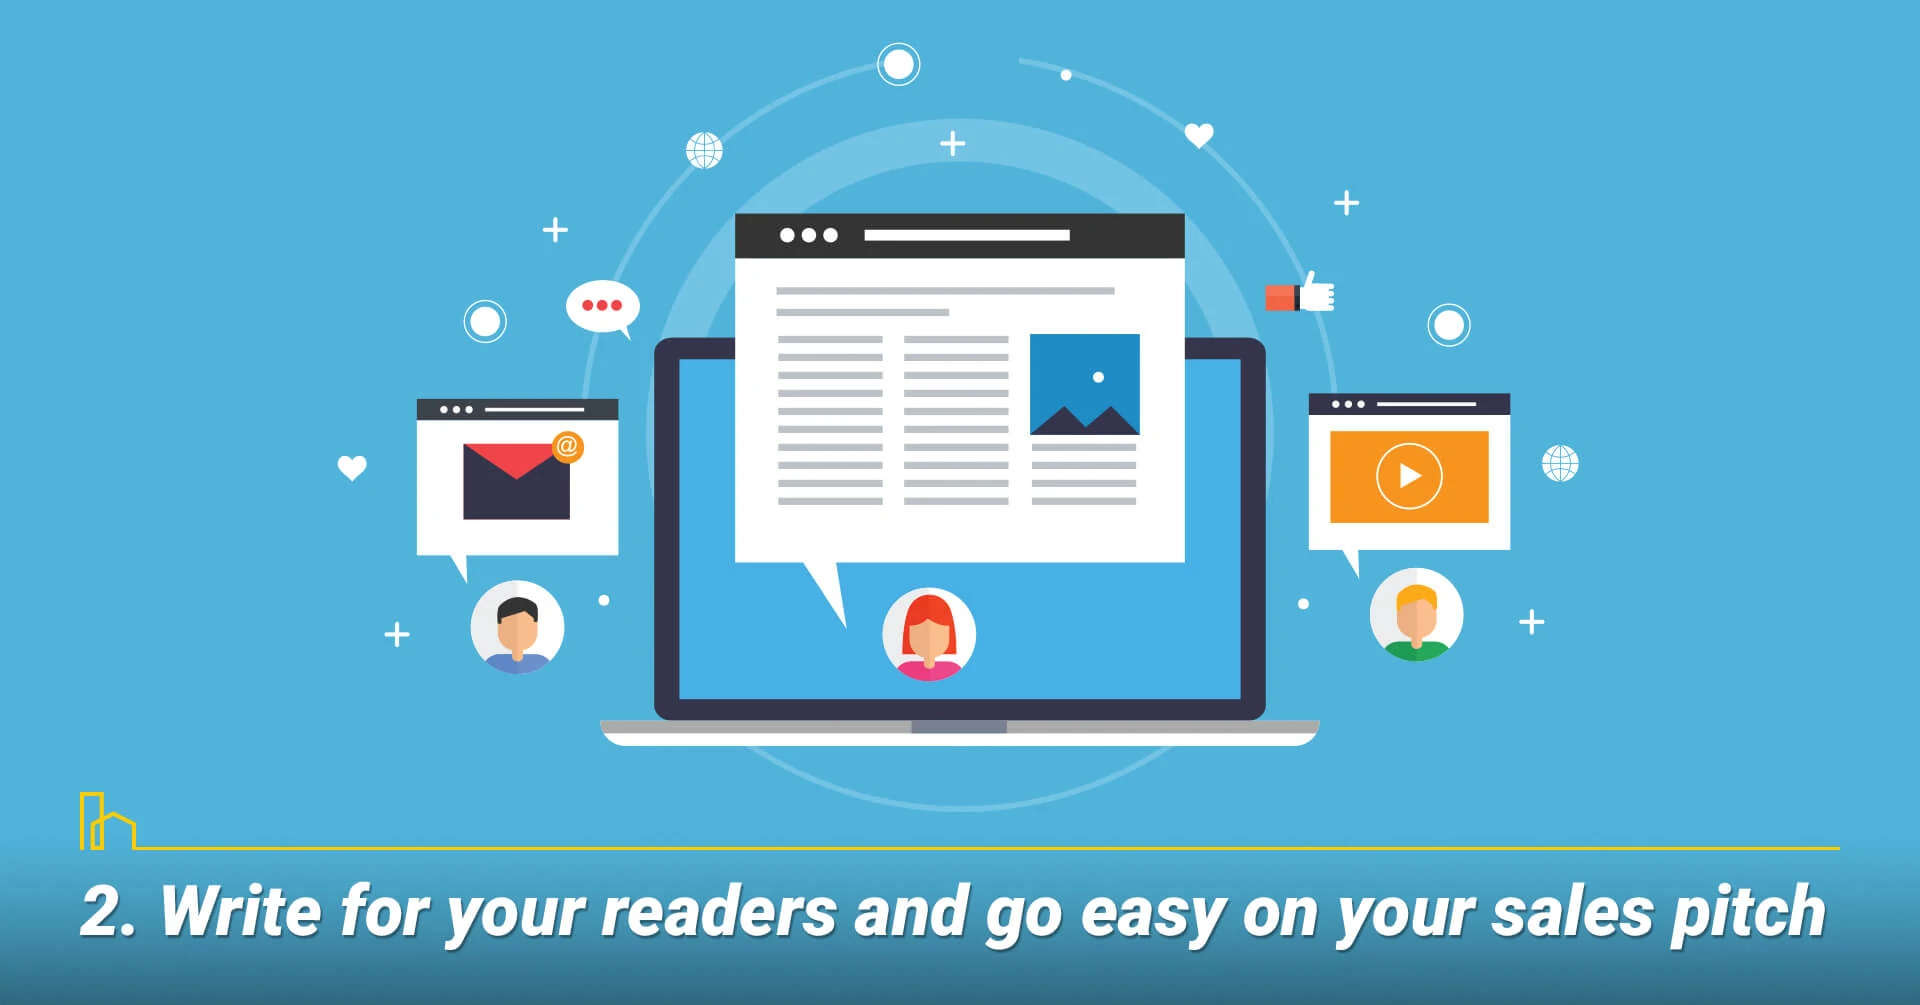 Write for your readers and go easy on your sales pitch, keep your audience in mind